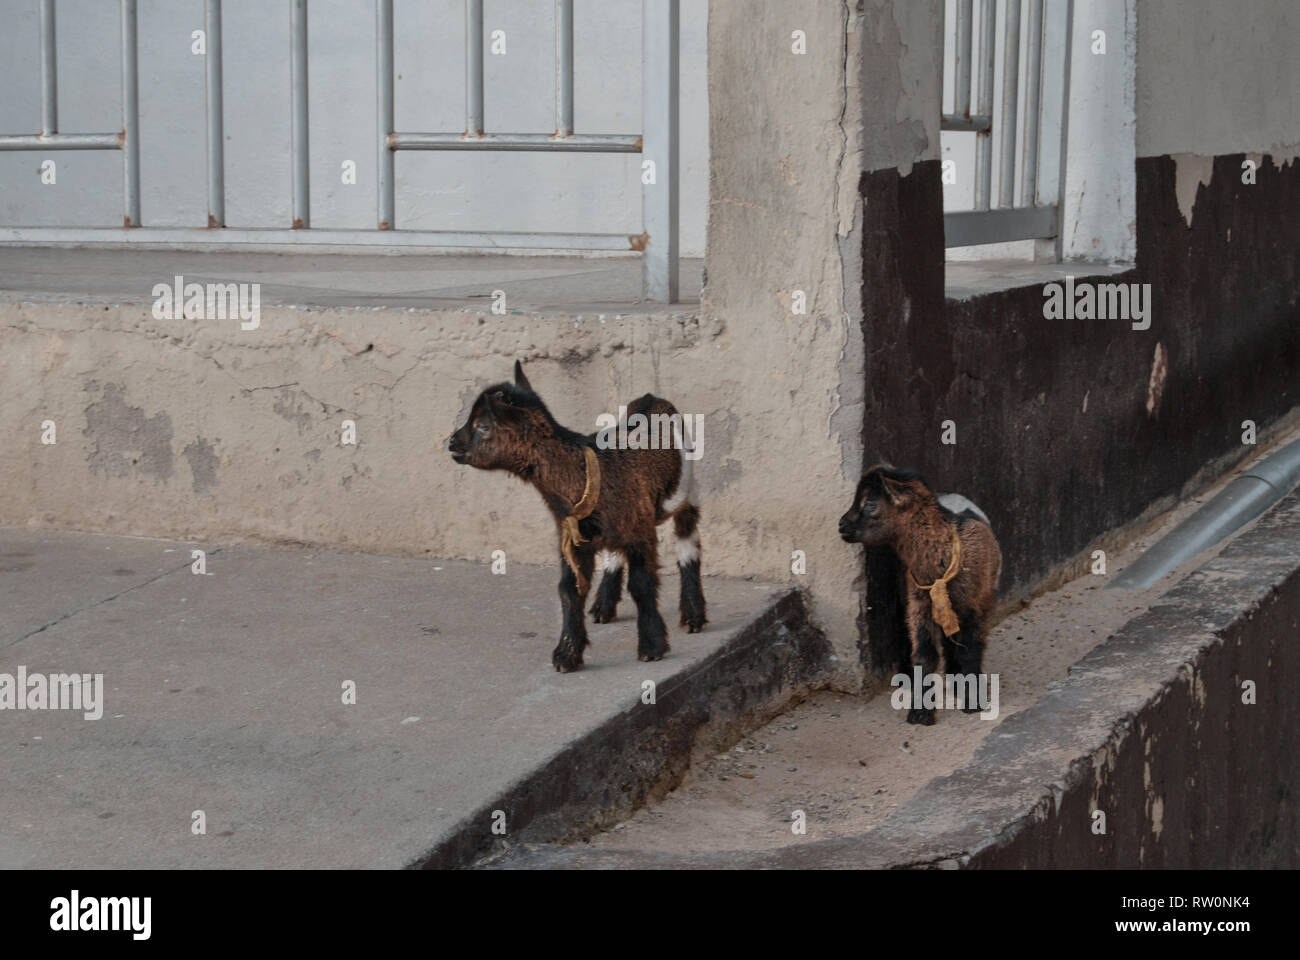 Two baby goats wandering around in the Ghanaian city of Elmina, West Africa Stock Photo